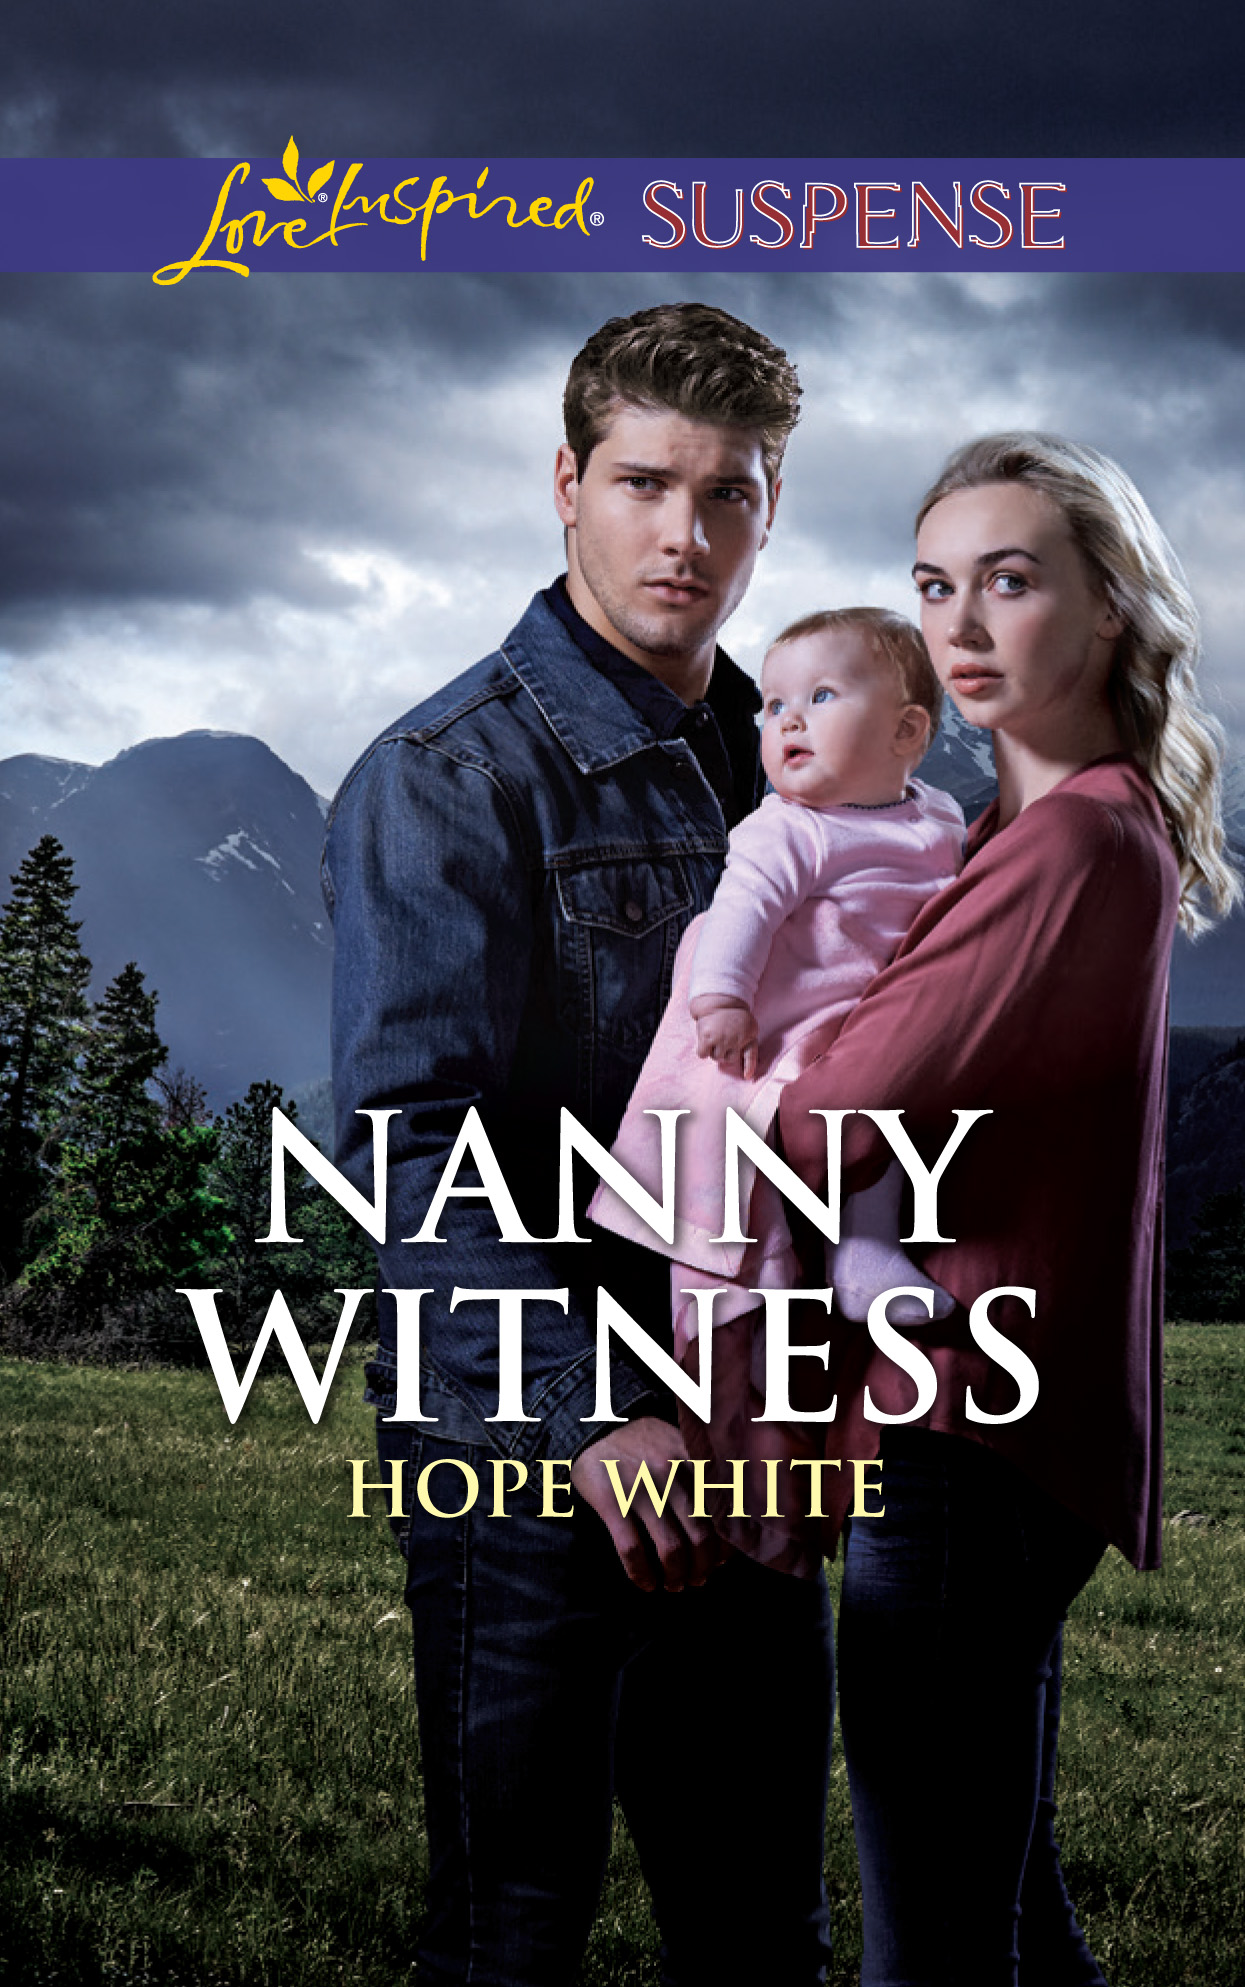 Nanny Witness by Hope White